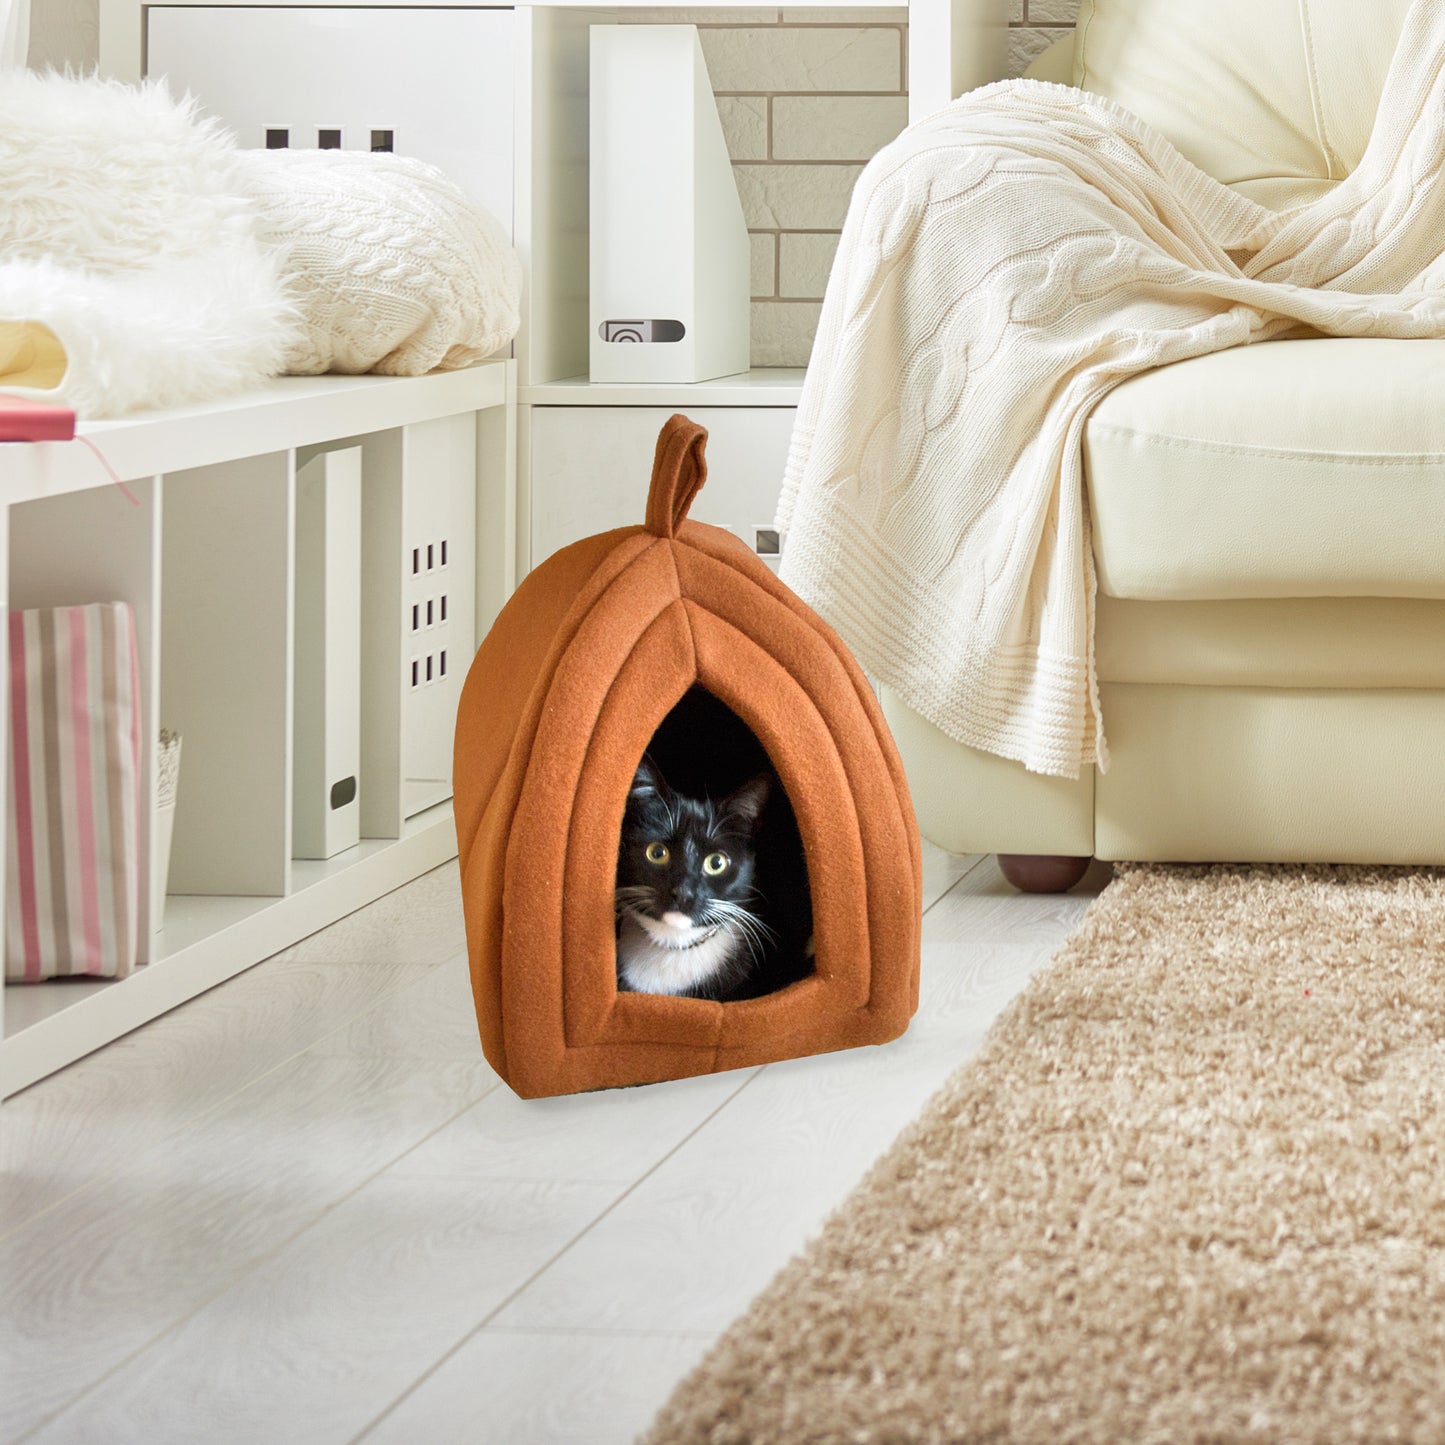 PETMAKER Cat House for Small Animals, Brown